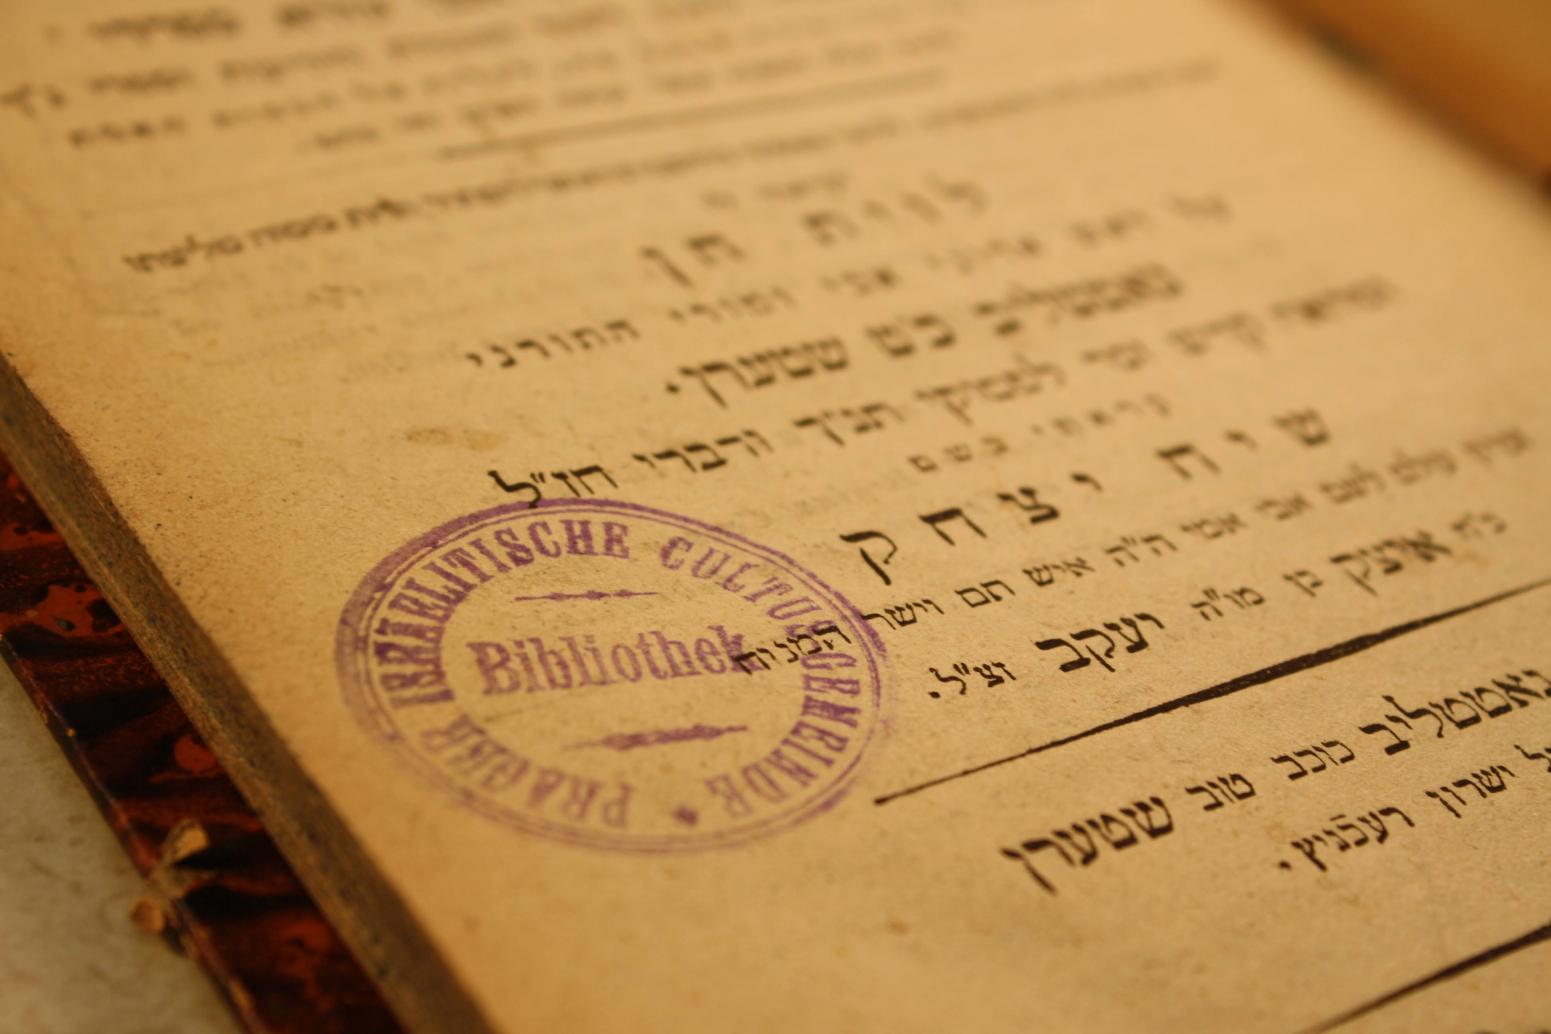 Page from “Sefer Yesod More ve-Sod Torah” bearing Jewish Community Library in Prague ownership stamp.